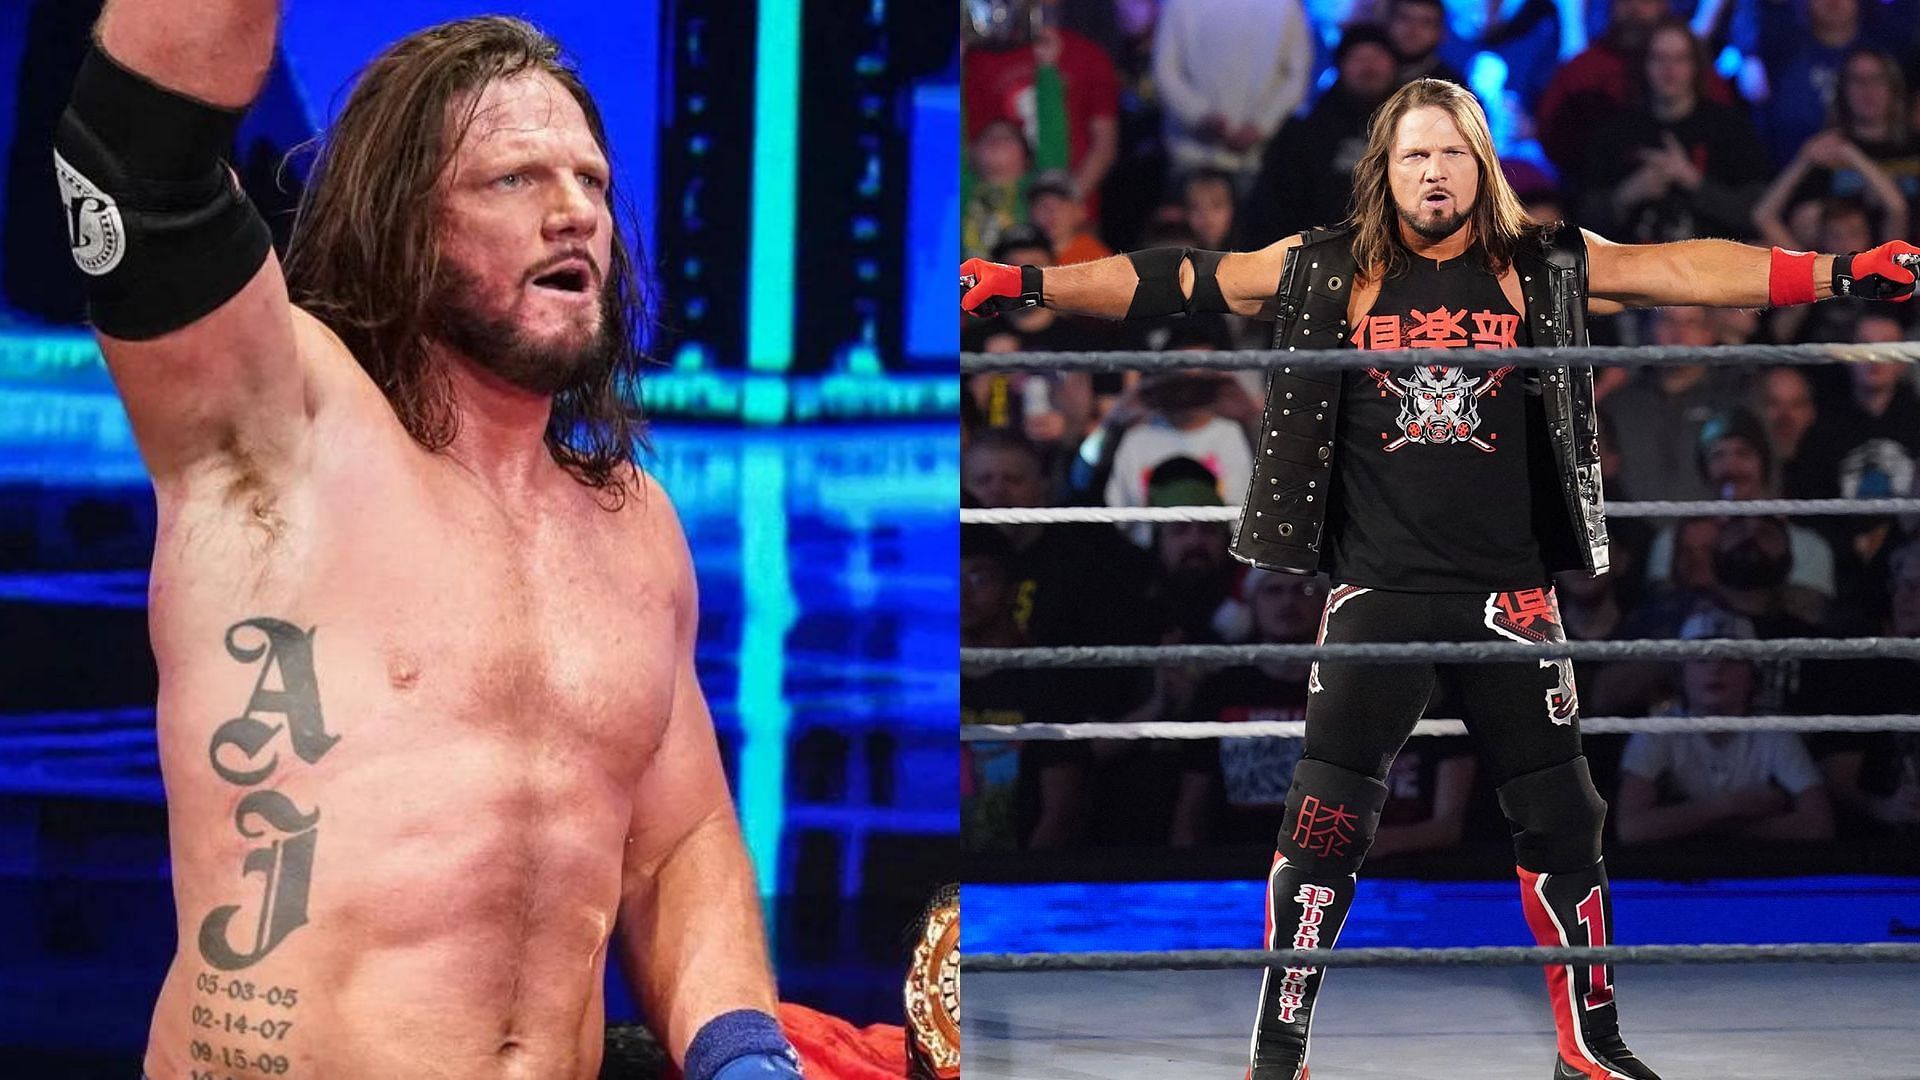 AJ Styles will be in action on SmackDown